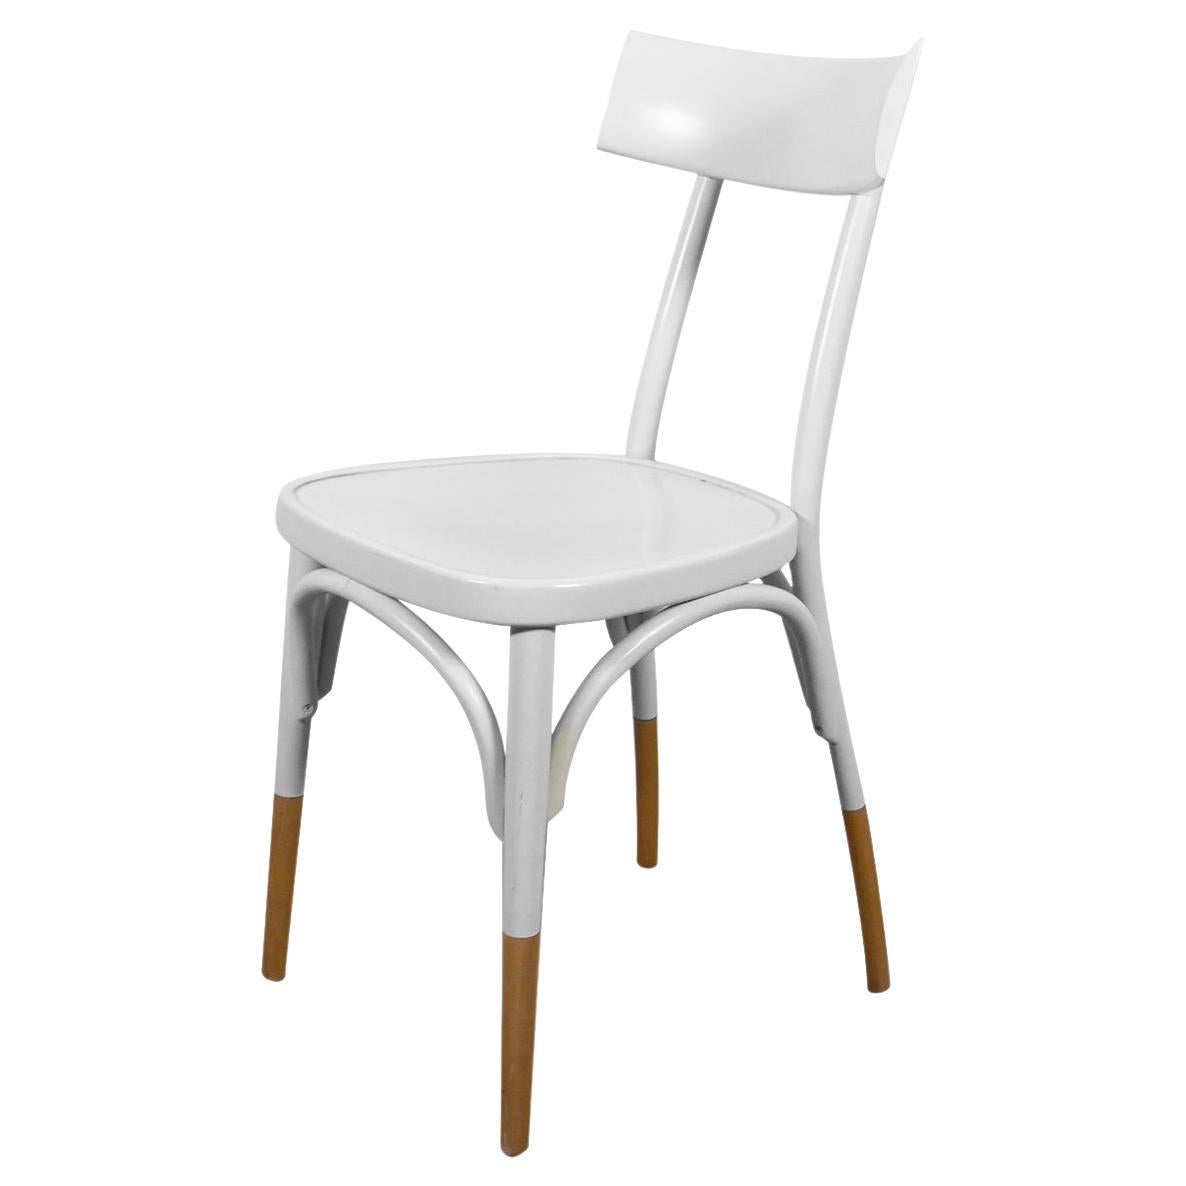 "Thonet" White Chair Made of Wood